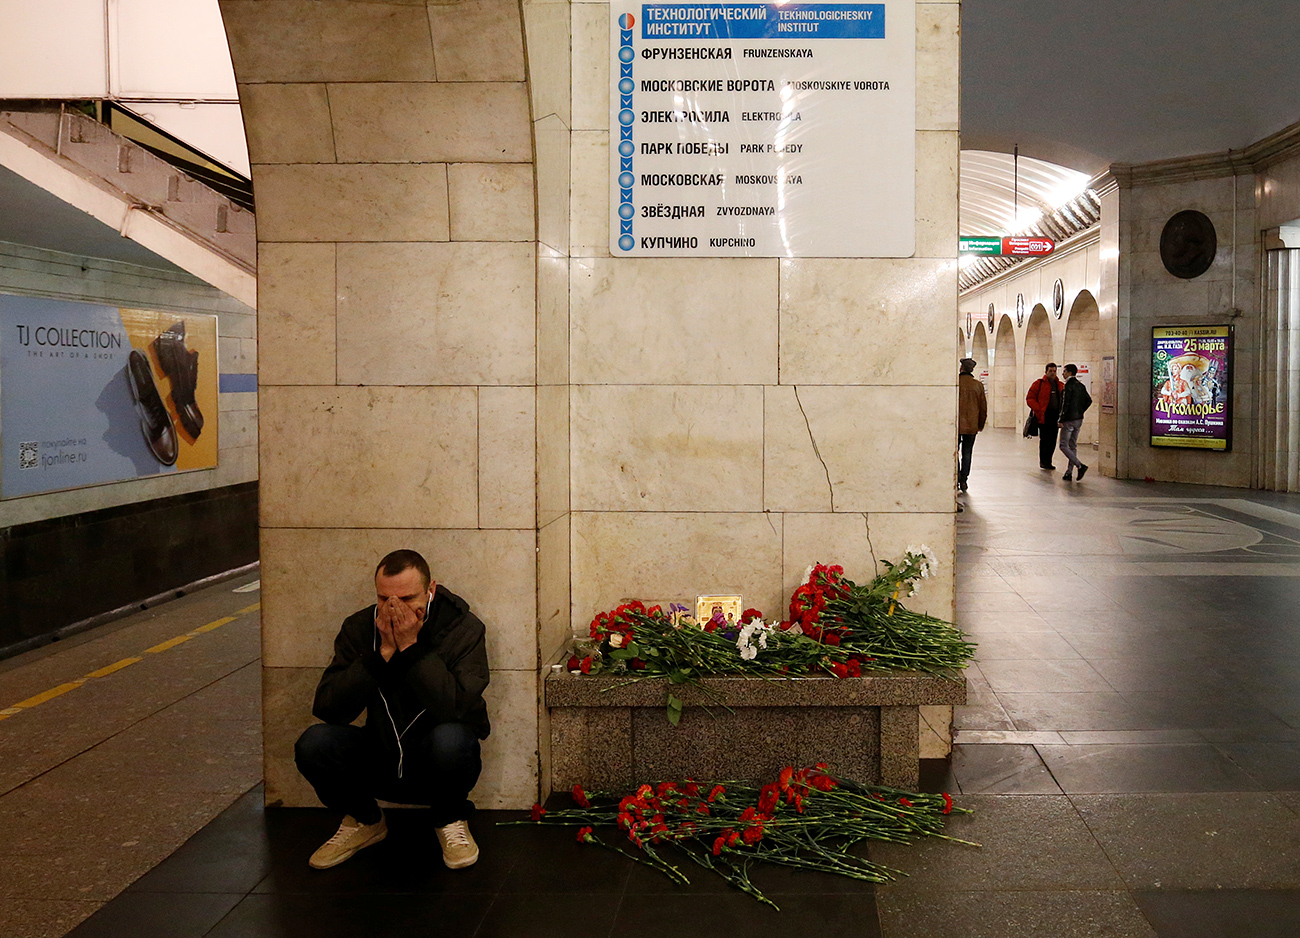 A man reacts next to a memorial site for the victims of a blast in St. Petersburg metro, at Tekhnologicheskiy institut metro station in St. Petersburg, April 4, 2017. 